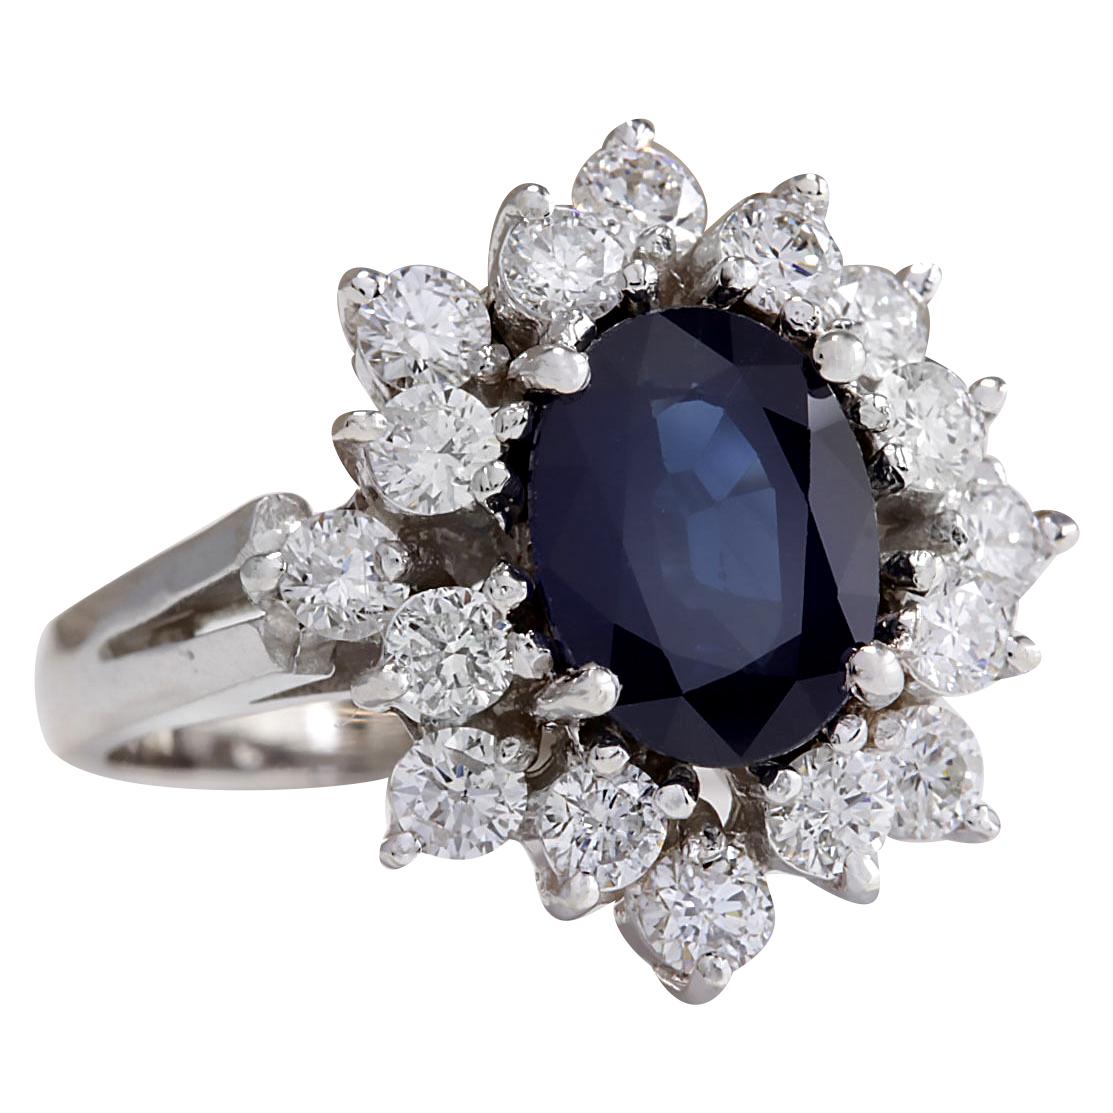 Stamped: 14K White Gold
Total Ring Weight: 5.0 Gram
 Total Natural Sapphire Weight is 2.00 Carat (Measures: 9.00x7.00 mm)
Color: Blue
Total Natural Diamond Weight is 1.00 Carat
Color: F-G, Clarity: VS2-SI1
Face Measures: 17.00x16.40 mm
Sku: [702895W]